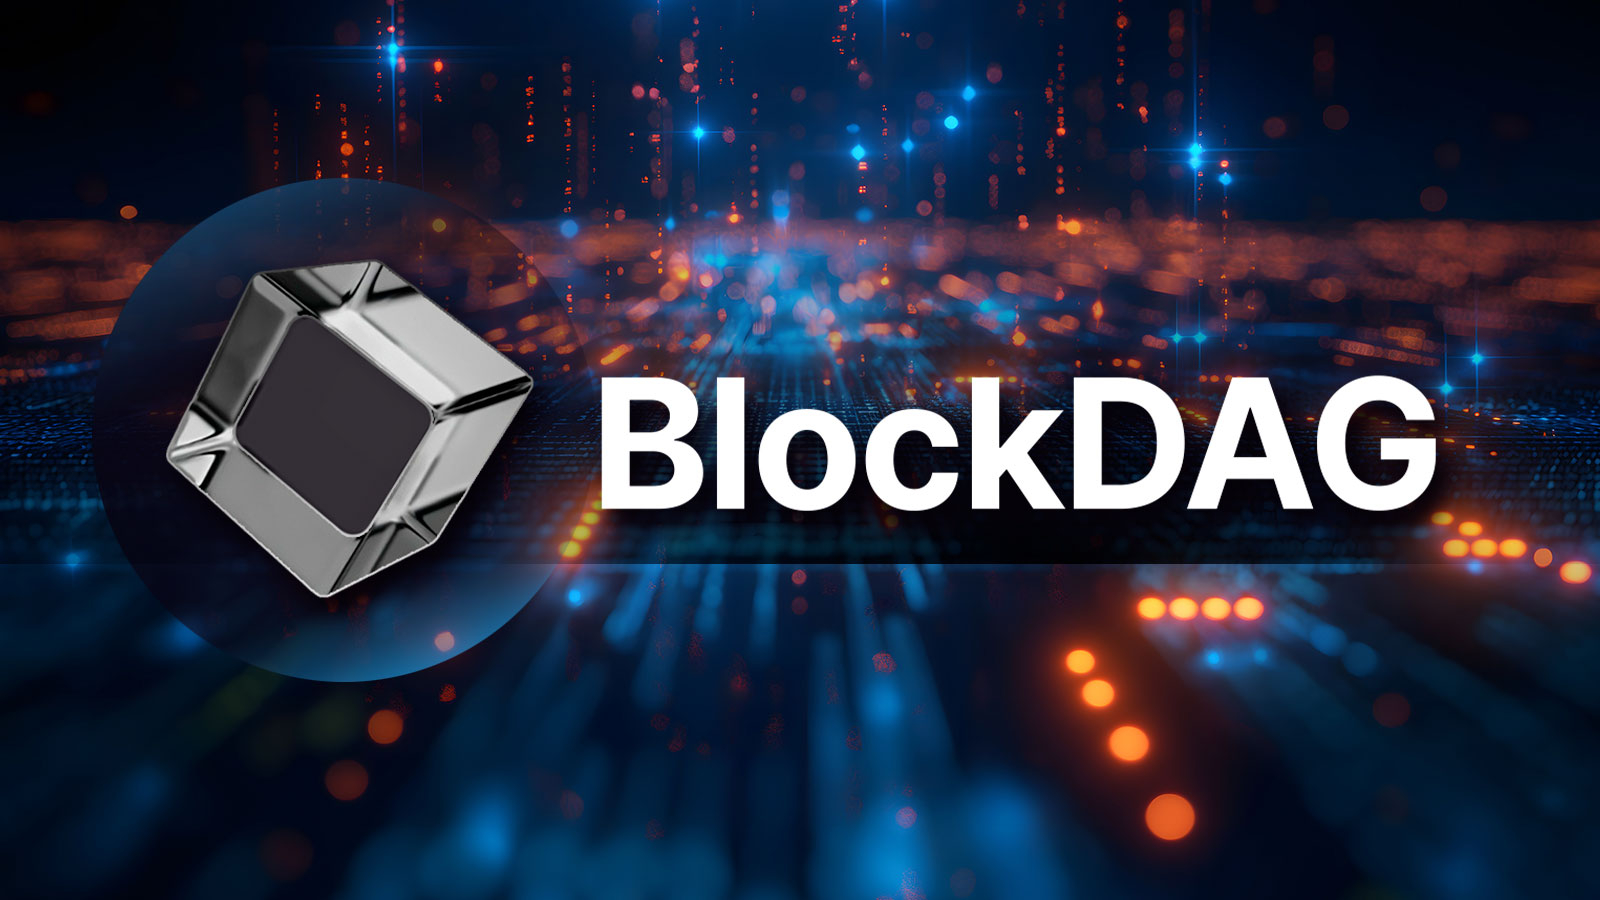 BlockDAG (BDAG) Token Sale Might be Garnering Traction in April as Bitcoin Cash (BCH) and Wax (WAX) Look Strong for Investors